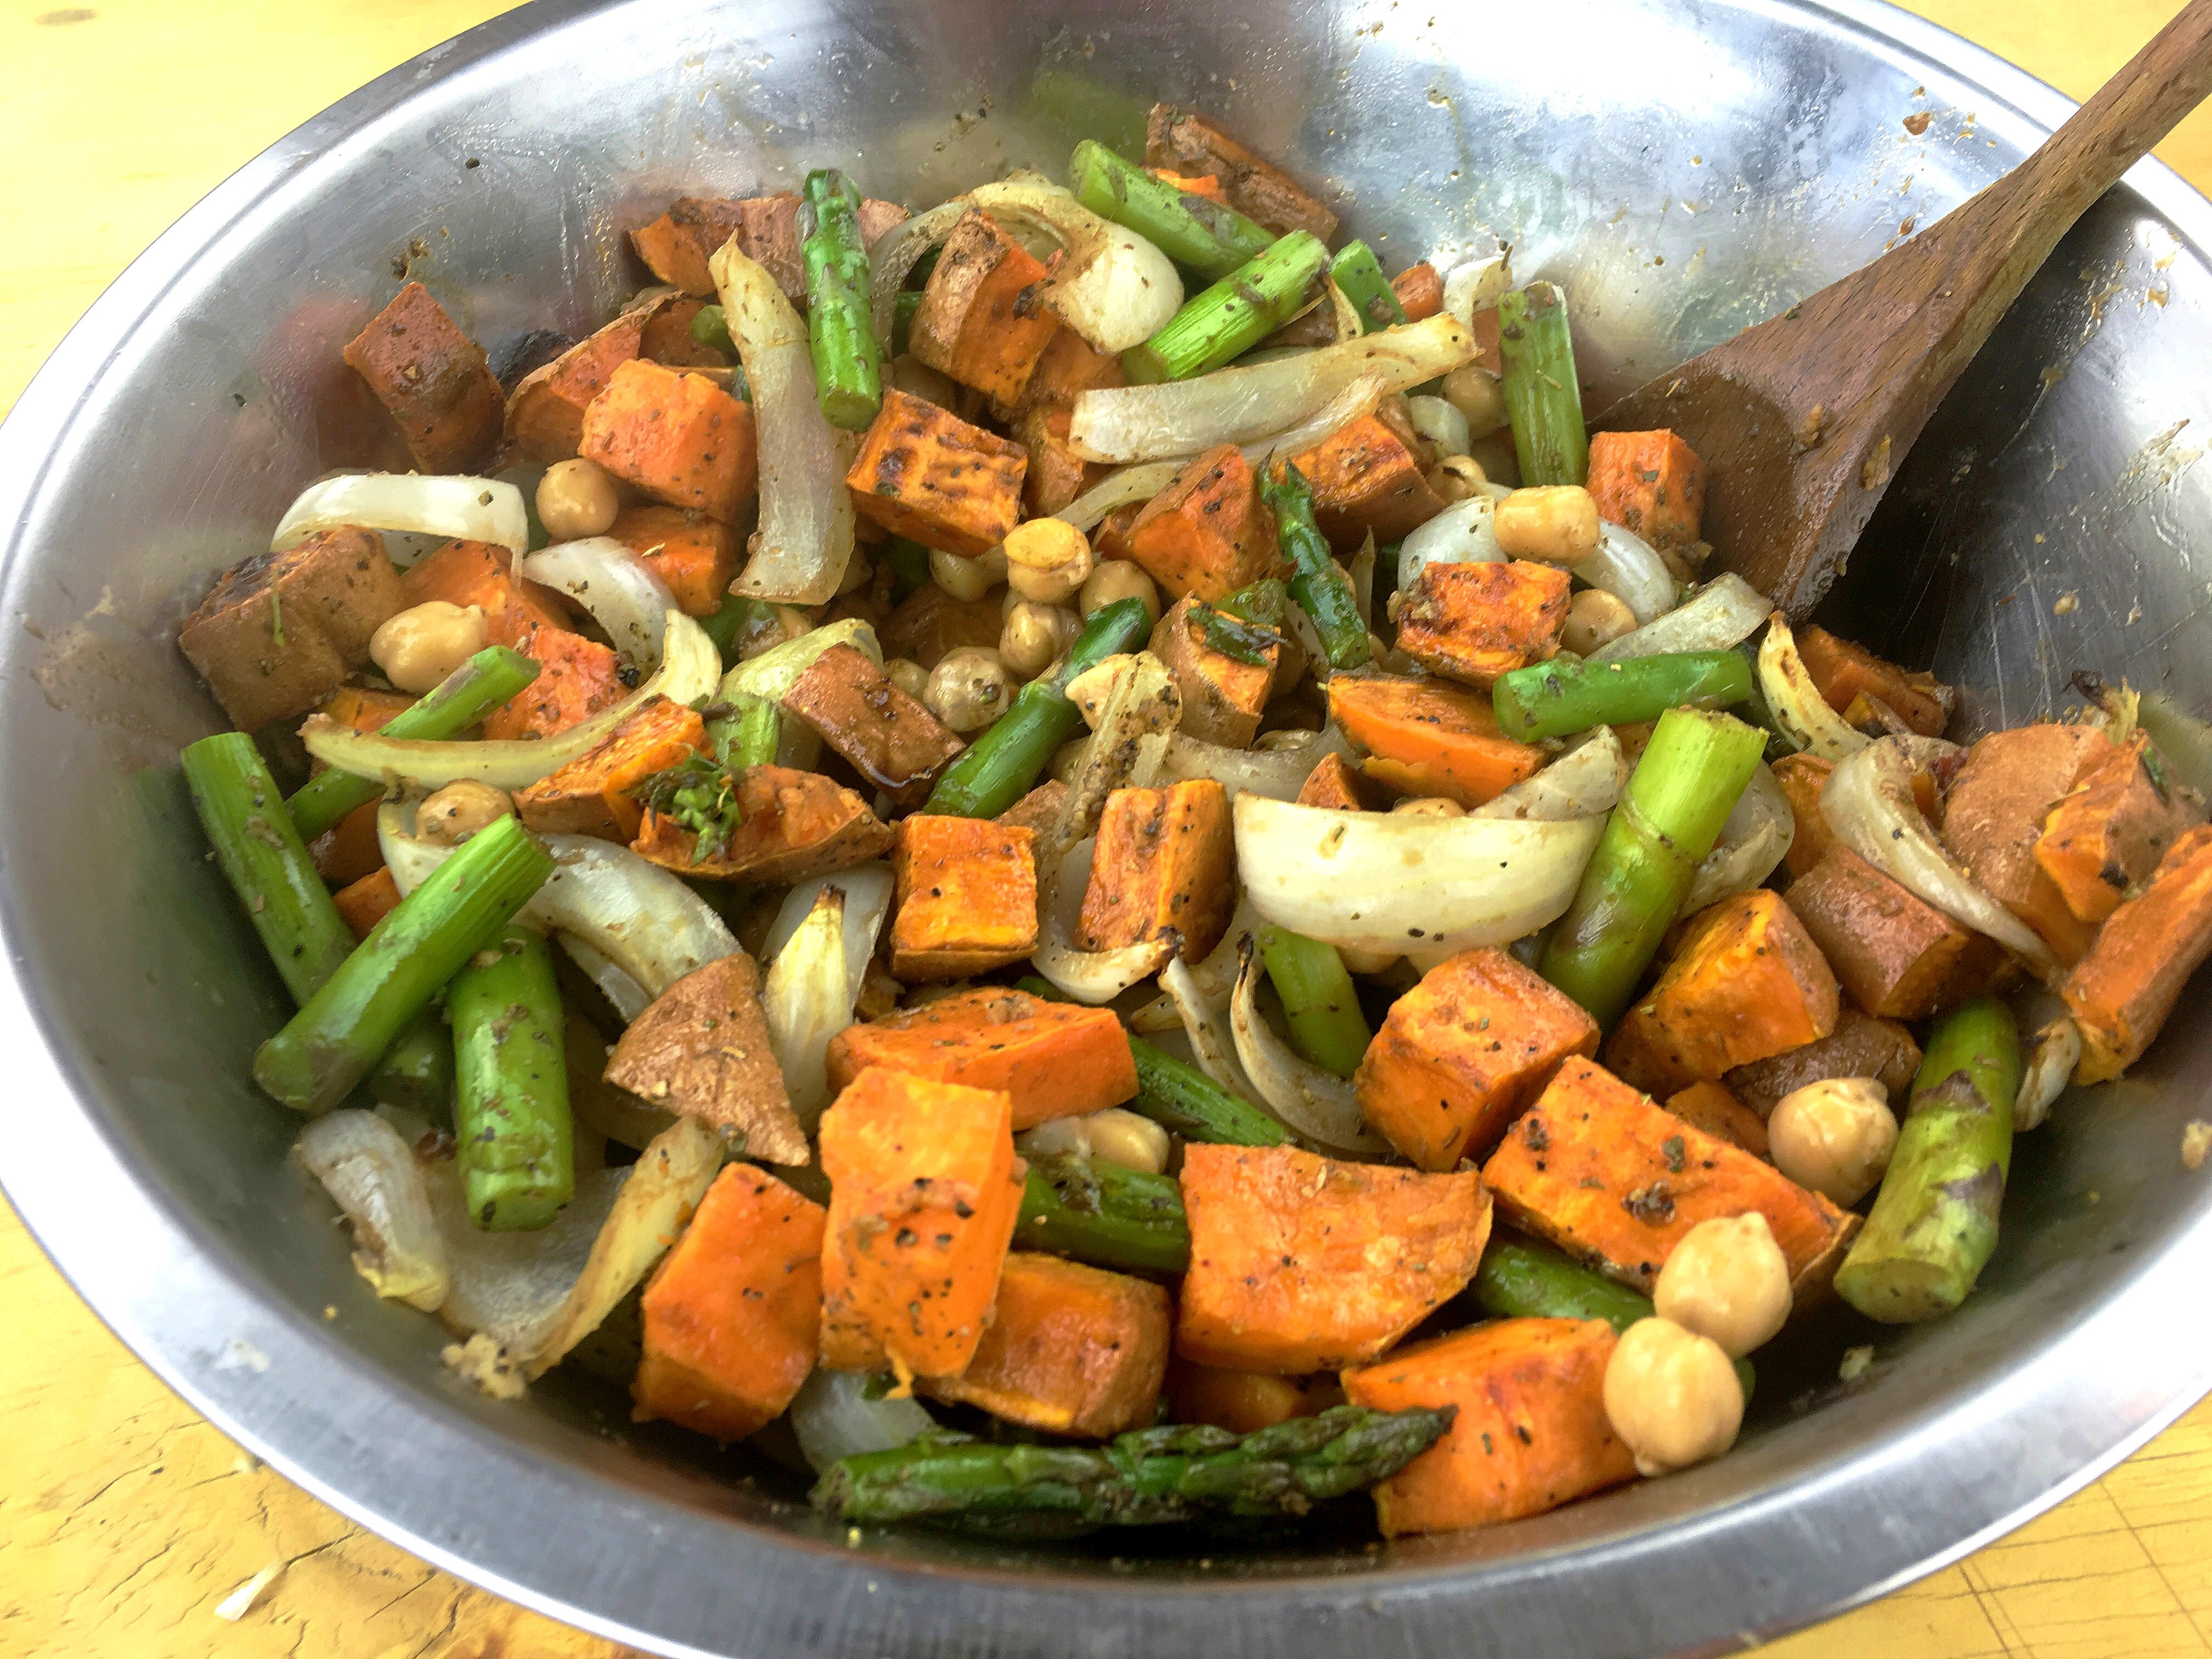 Roasted Sweet Potato, Asparagus, and Chickpeas